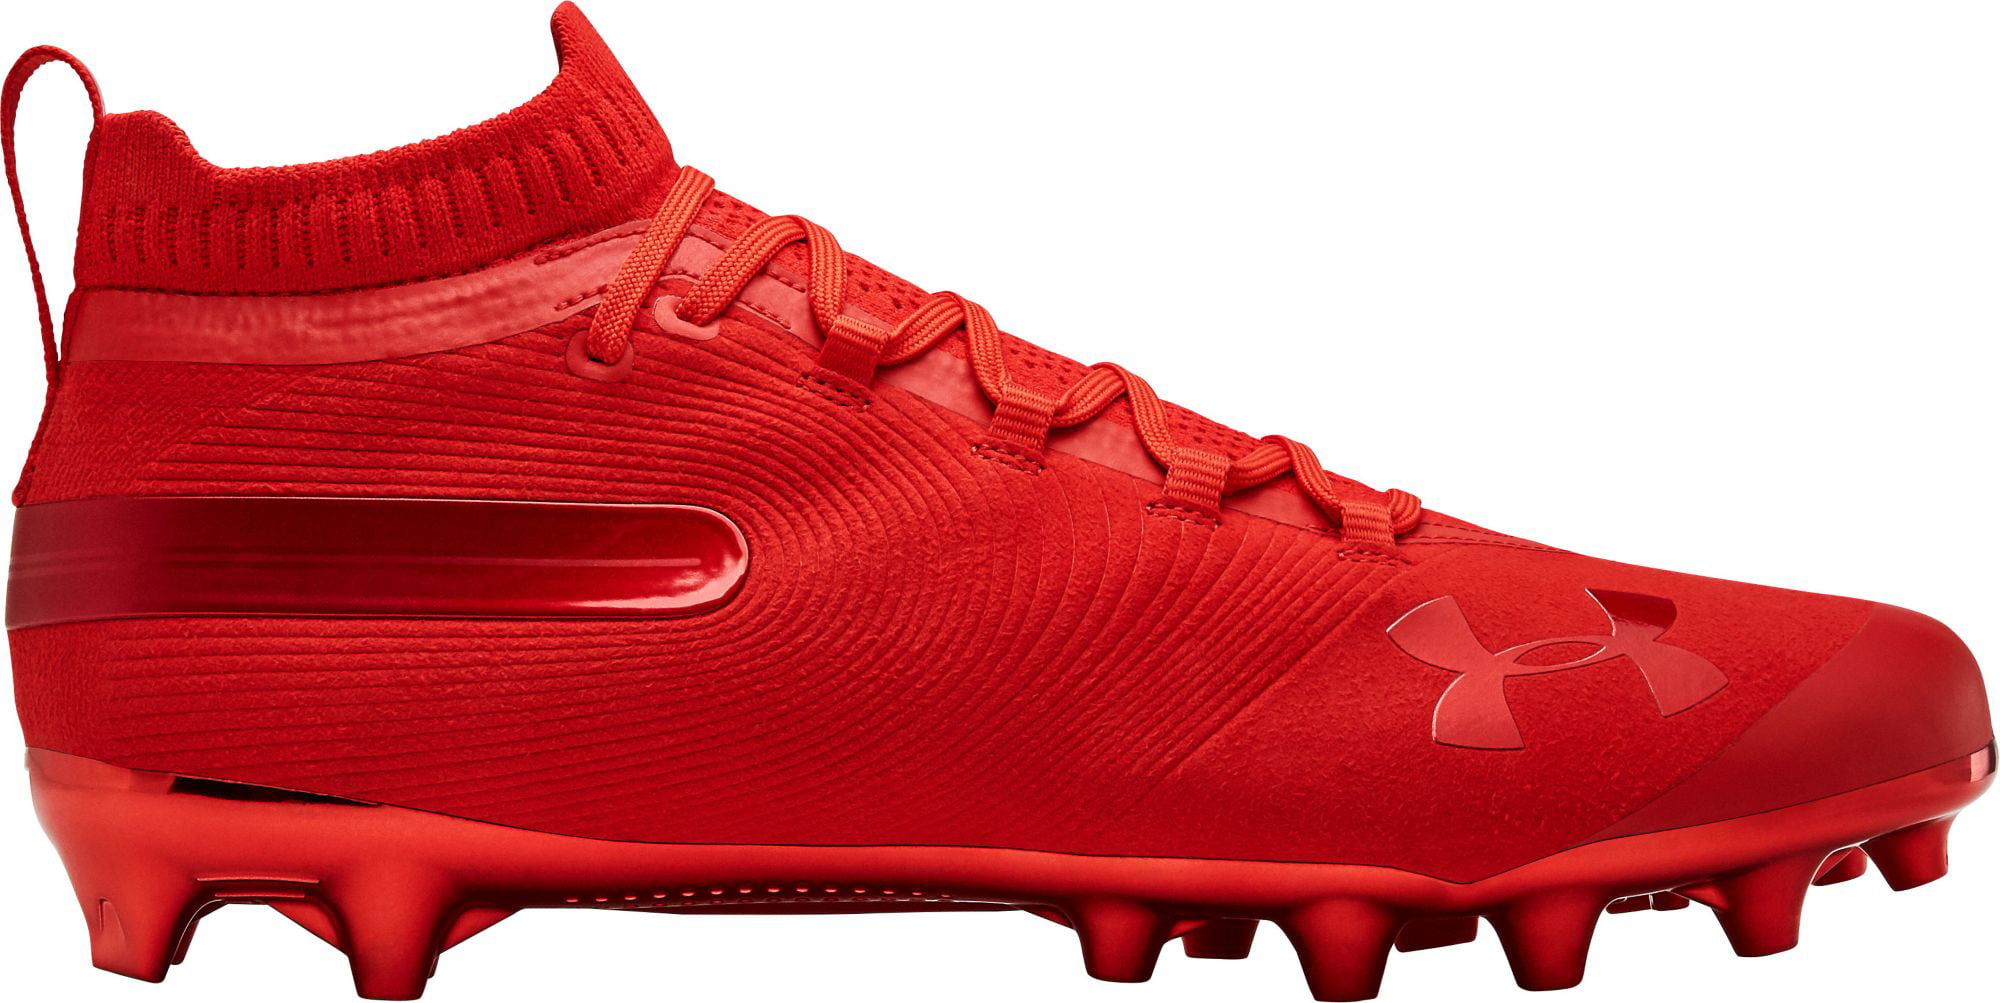 all red under armour cleats off 64 